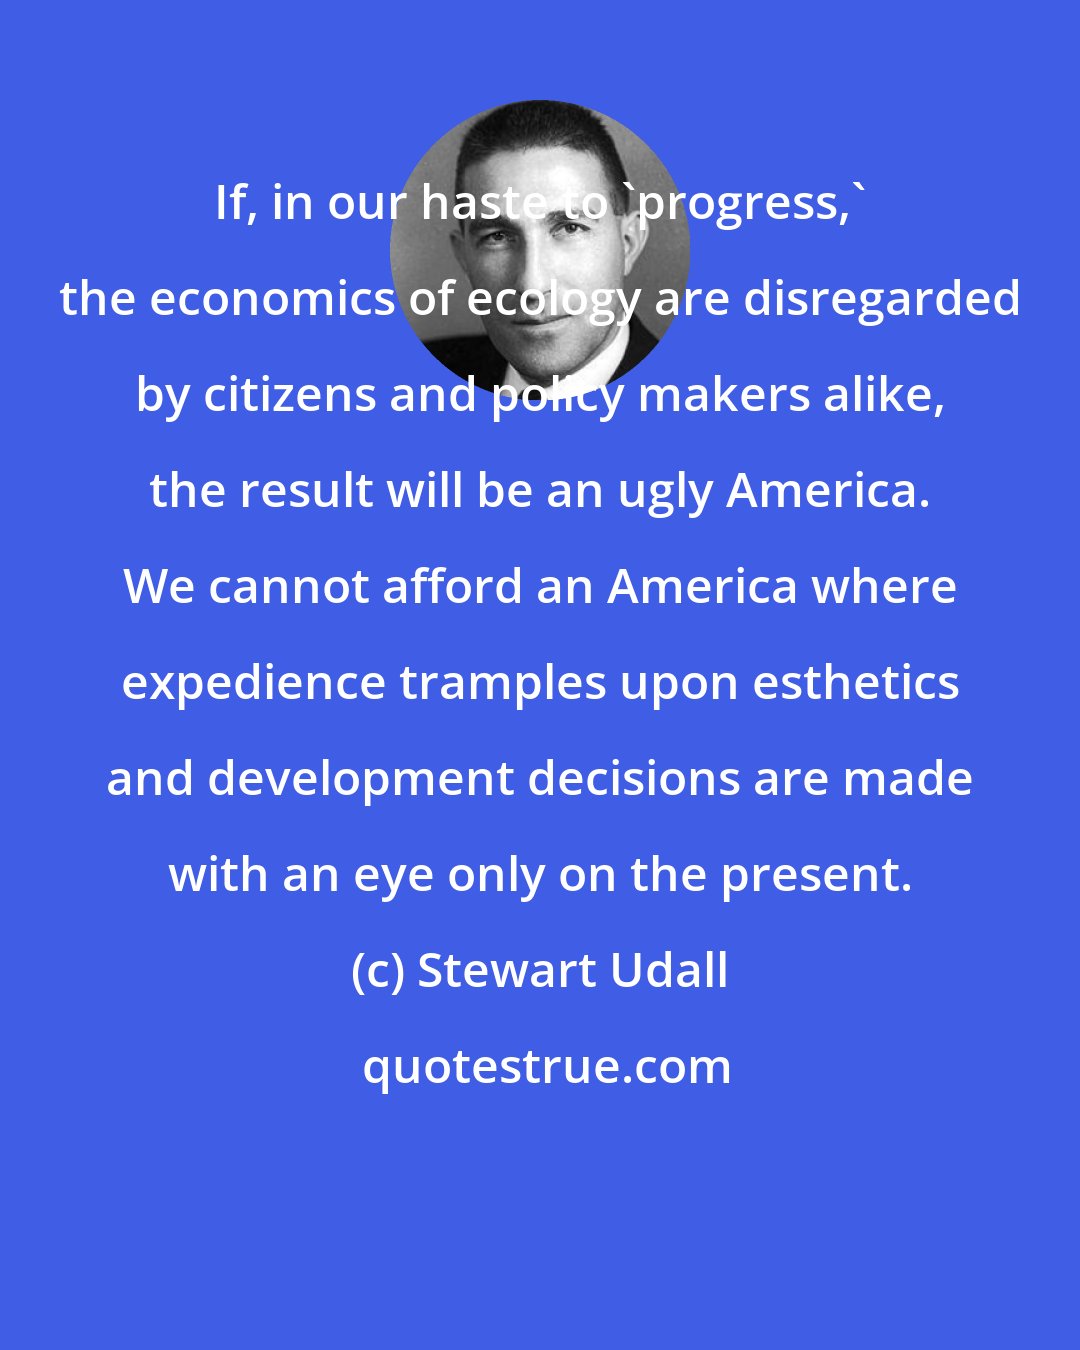 Stewart Udall: If, in our haste to 'progress,' the economics of ecology are disregarded by citizens and policy makers alike, the result will be an ugly America. We cannot afford an America where expedience tramples upon esthetics and development decisions are made with an eye only on the present.